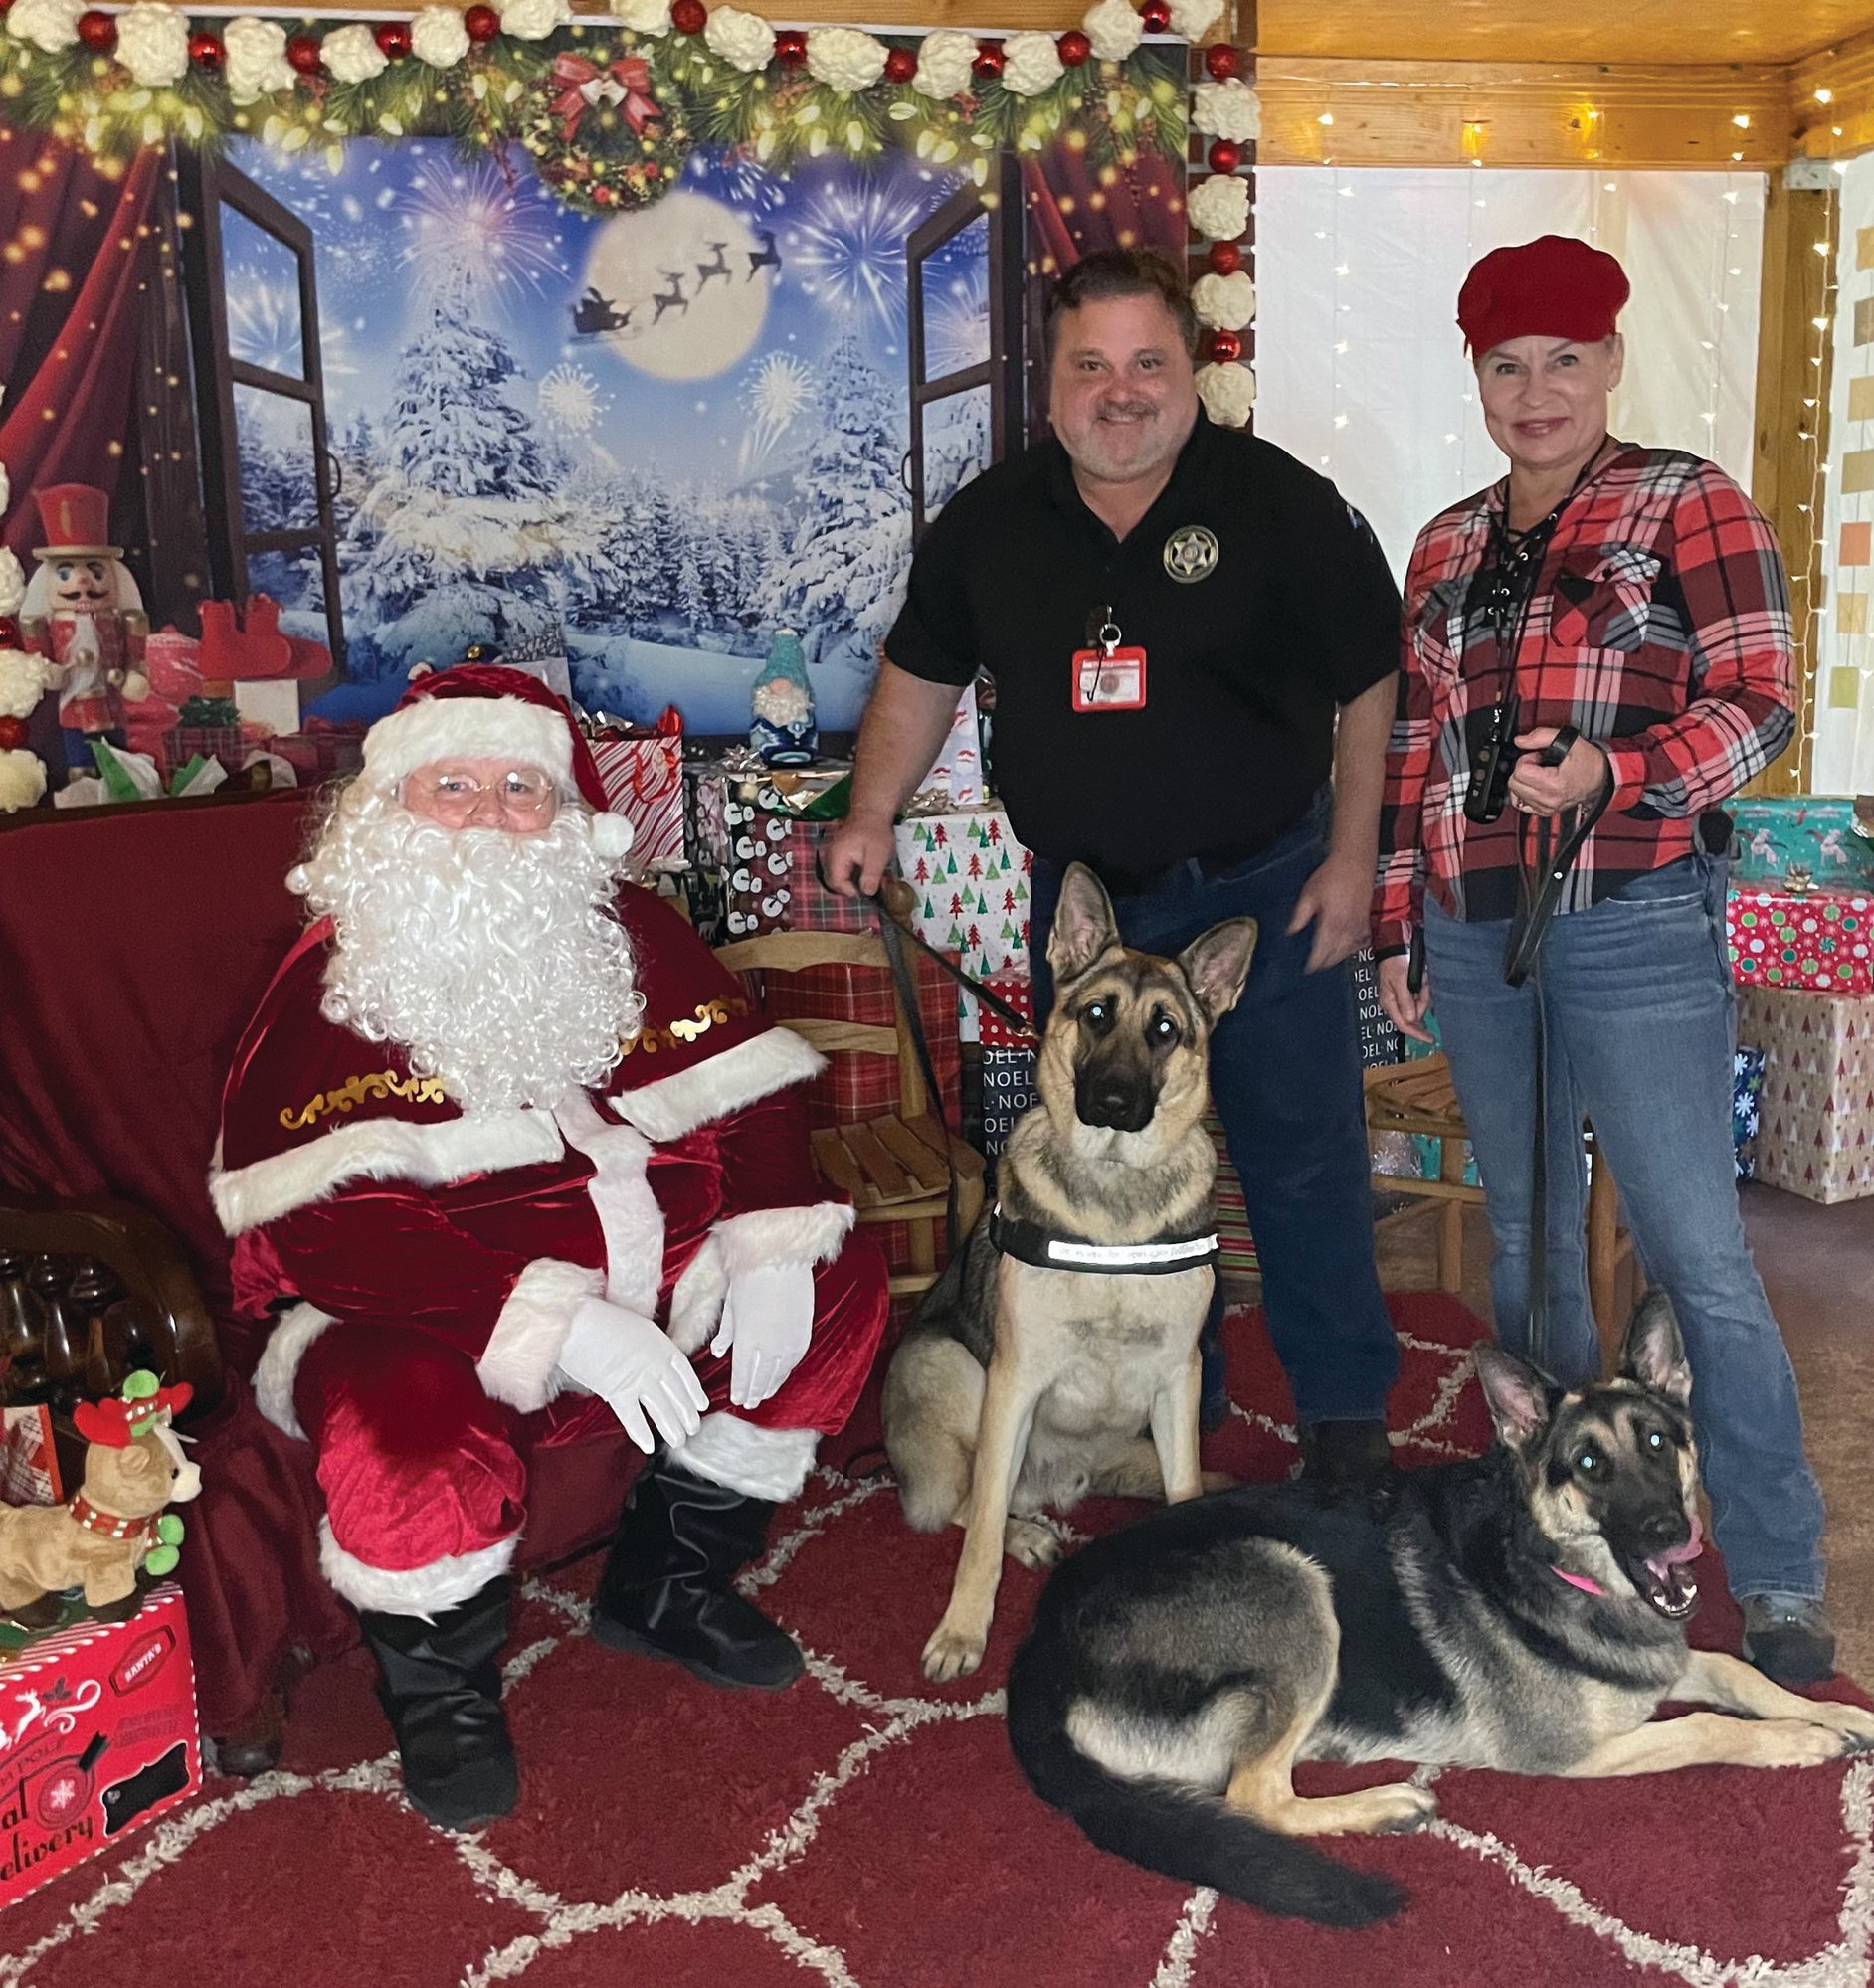 Santa at the Kellehers raises $1,500 for Clarendon County animal shelter |  The Sumter Item